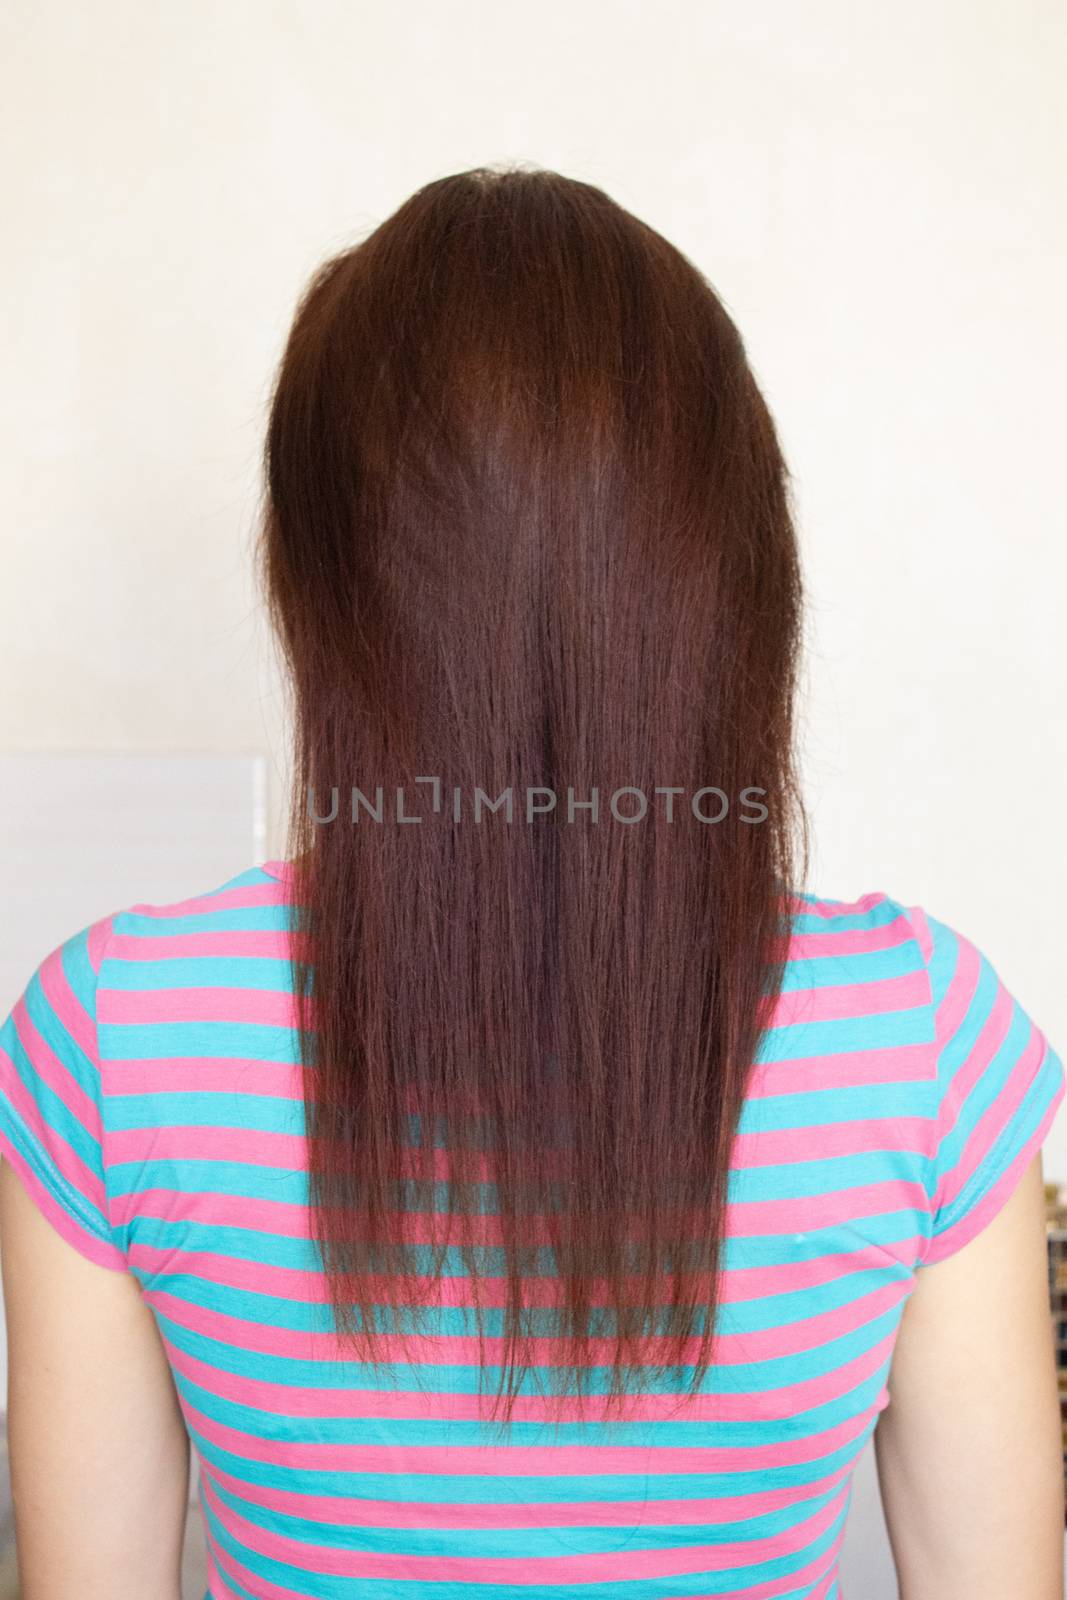 Long female hair chestnut color behind the girl by AnatoliiFoto